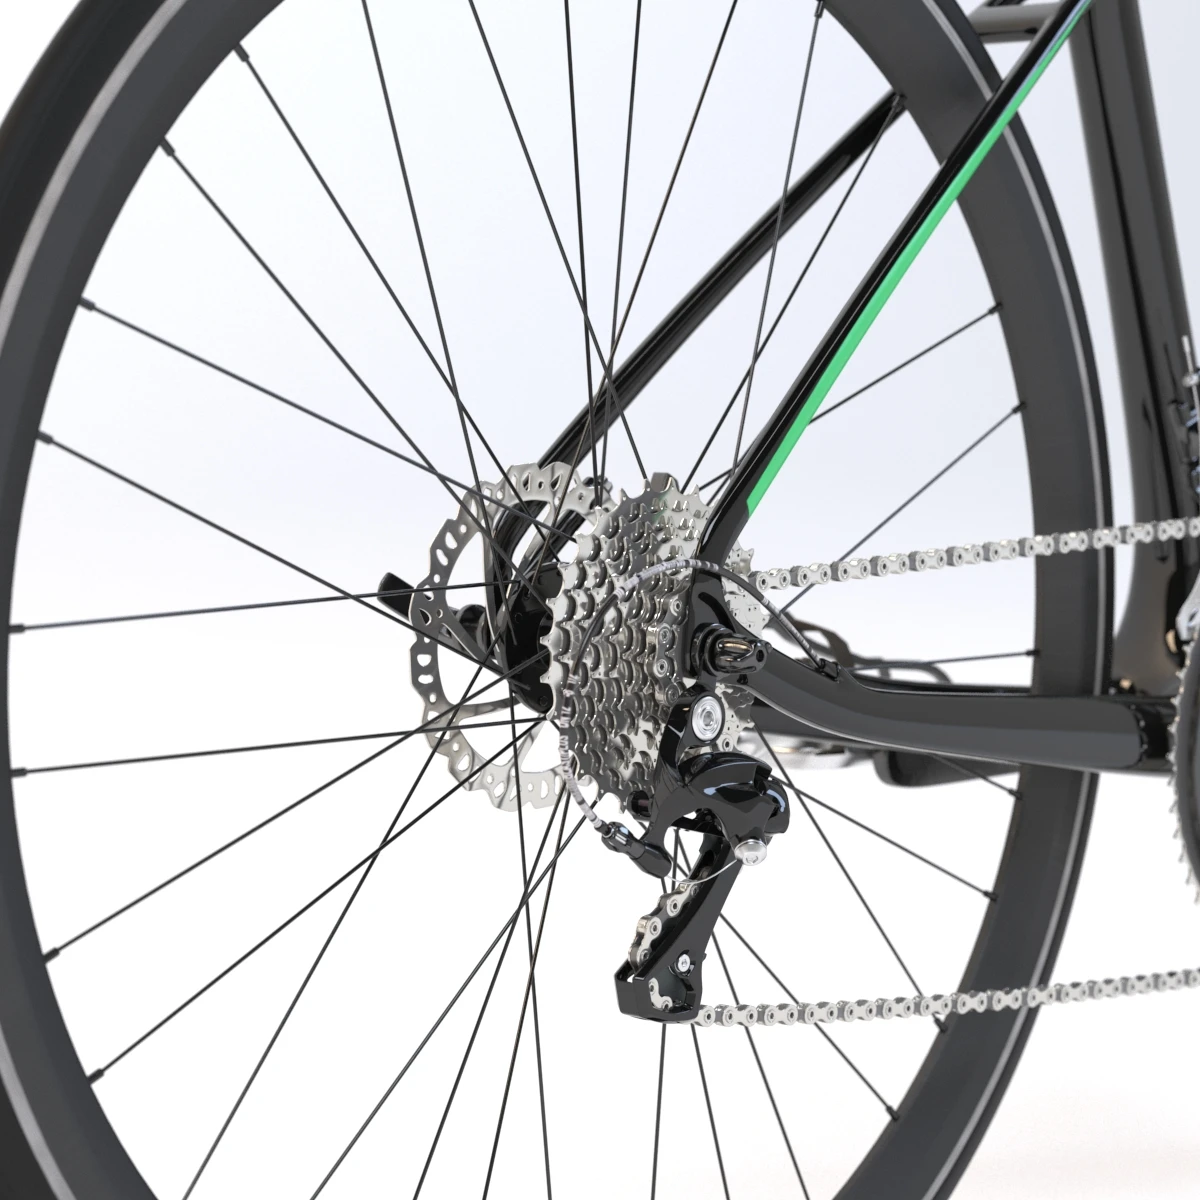 Giant Fastroad Cm1 Black Bicycle 3D Model_09